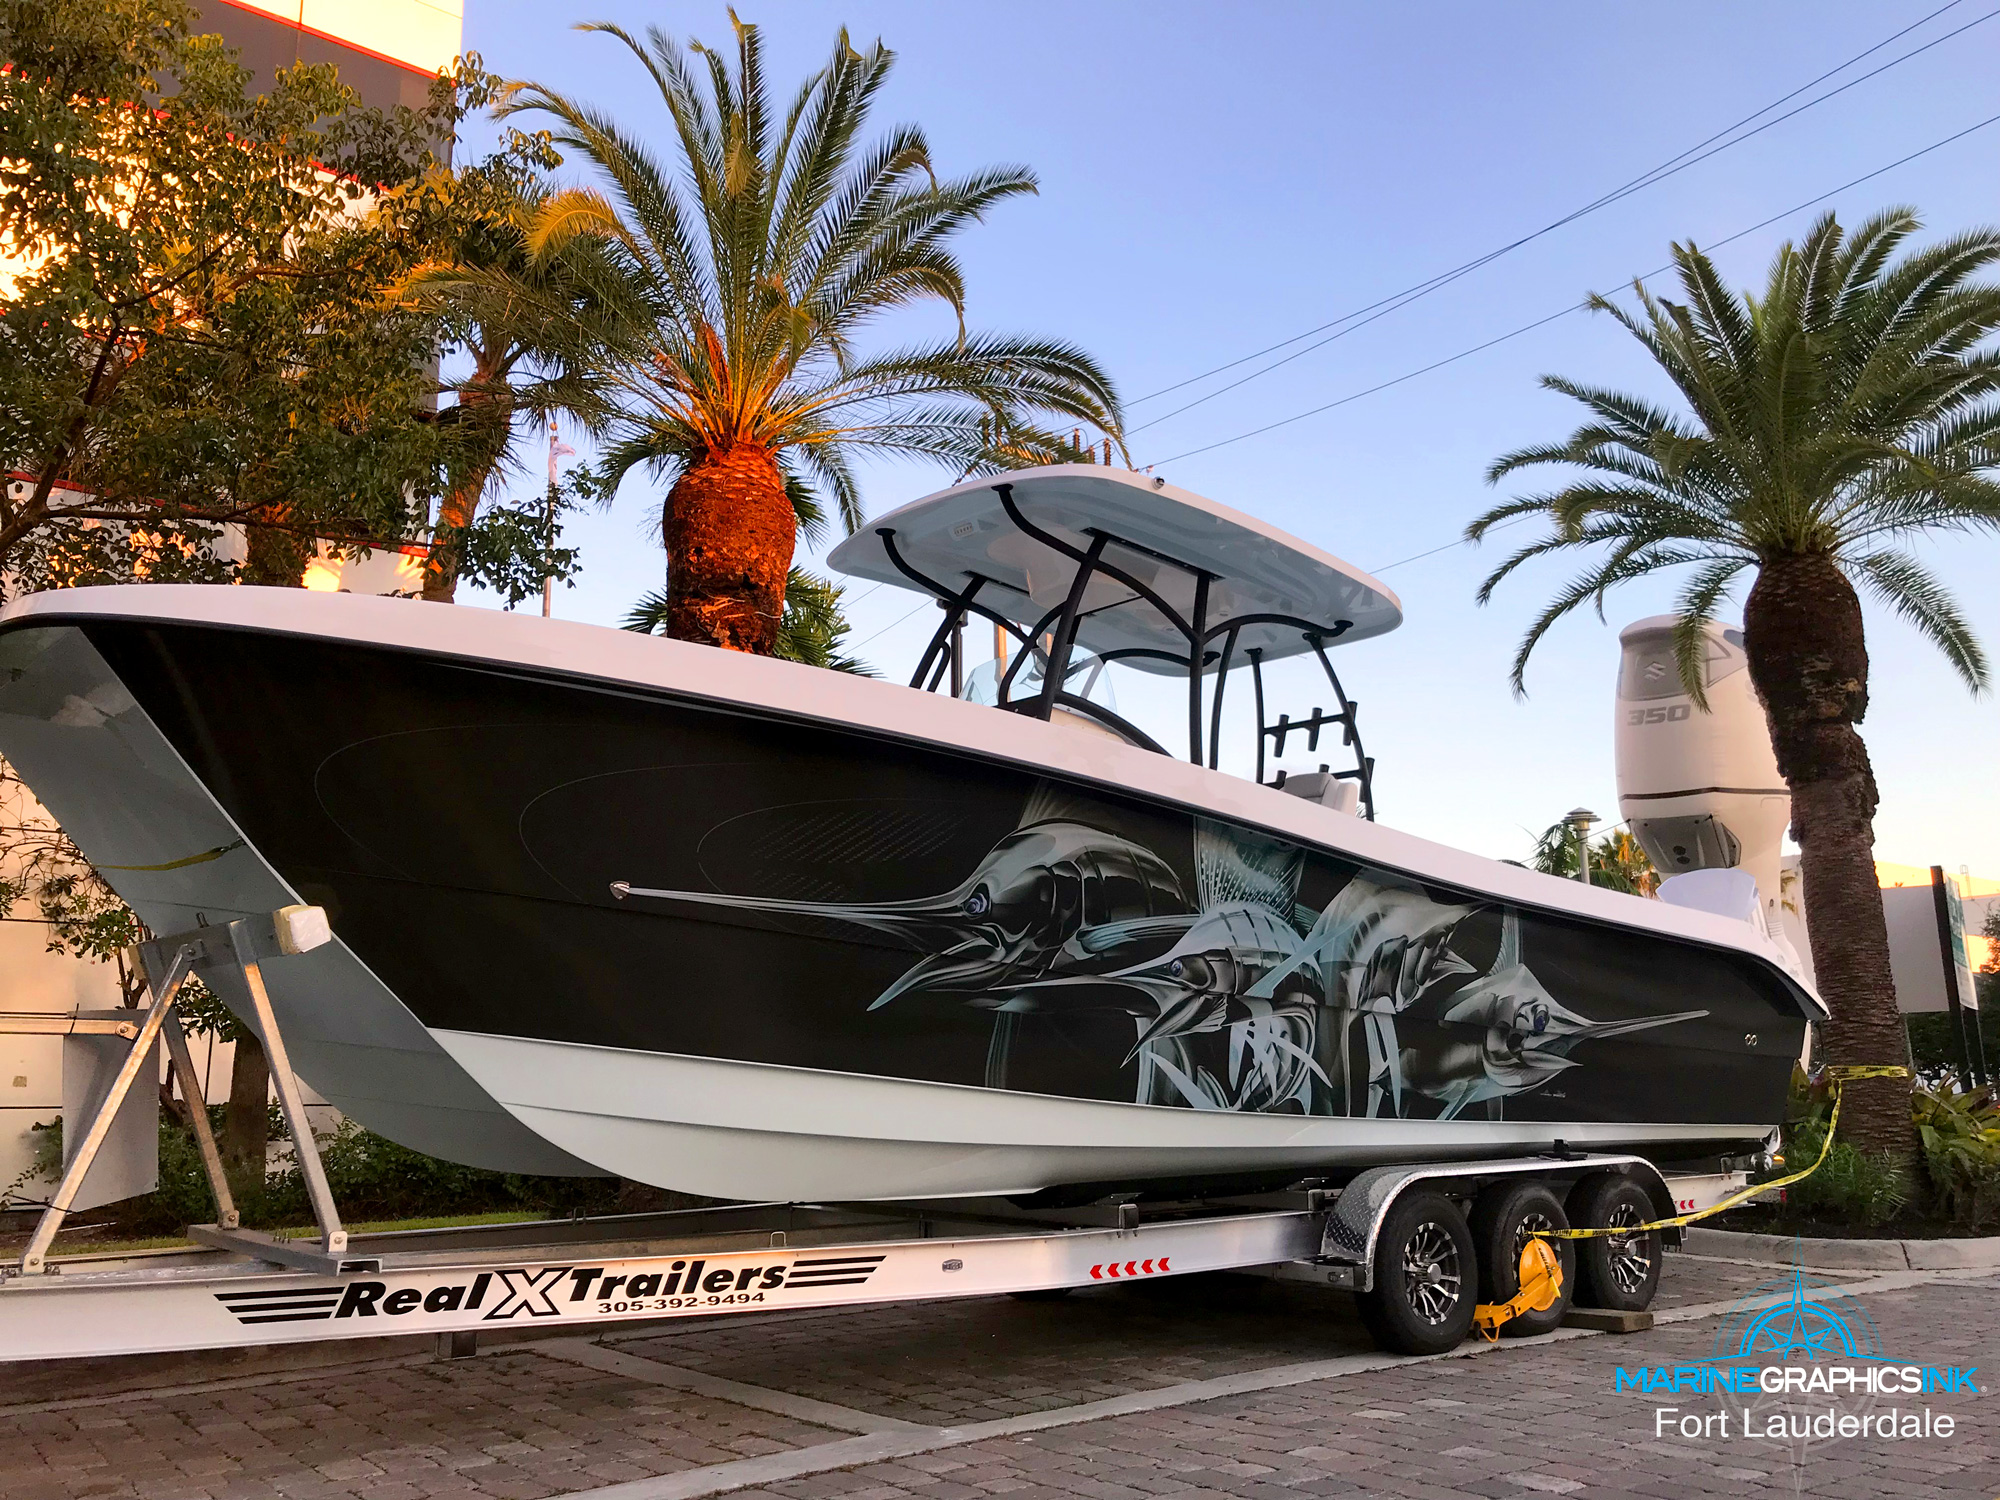 Winding up 2019 at the Fort Lauderdale boat show